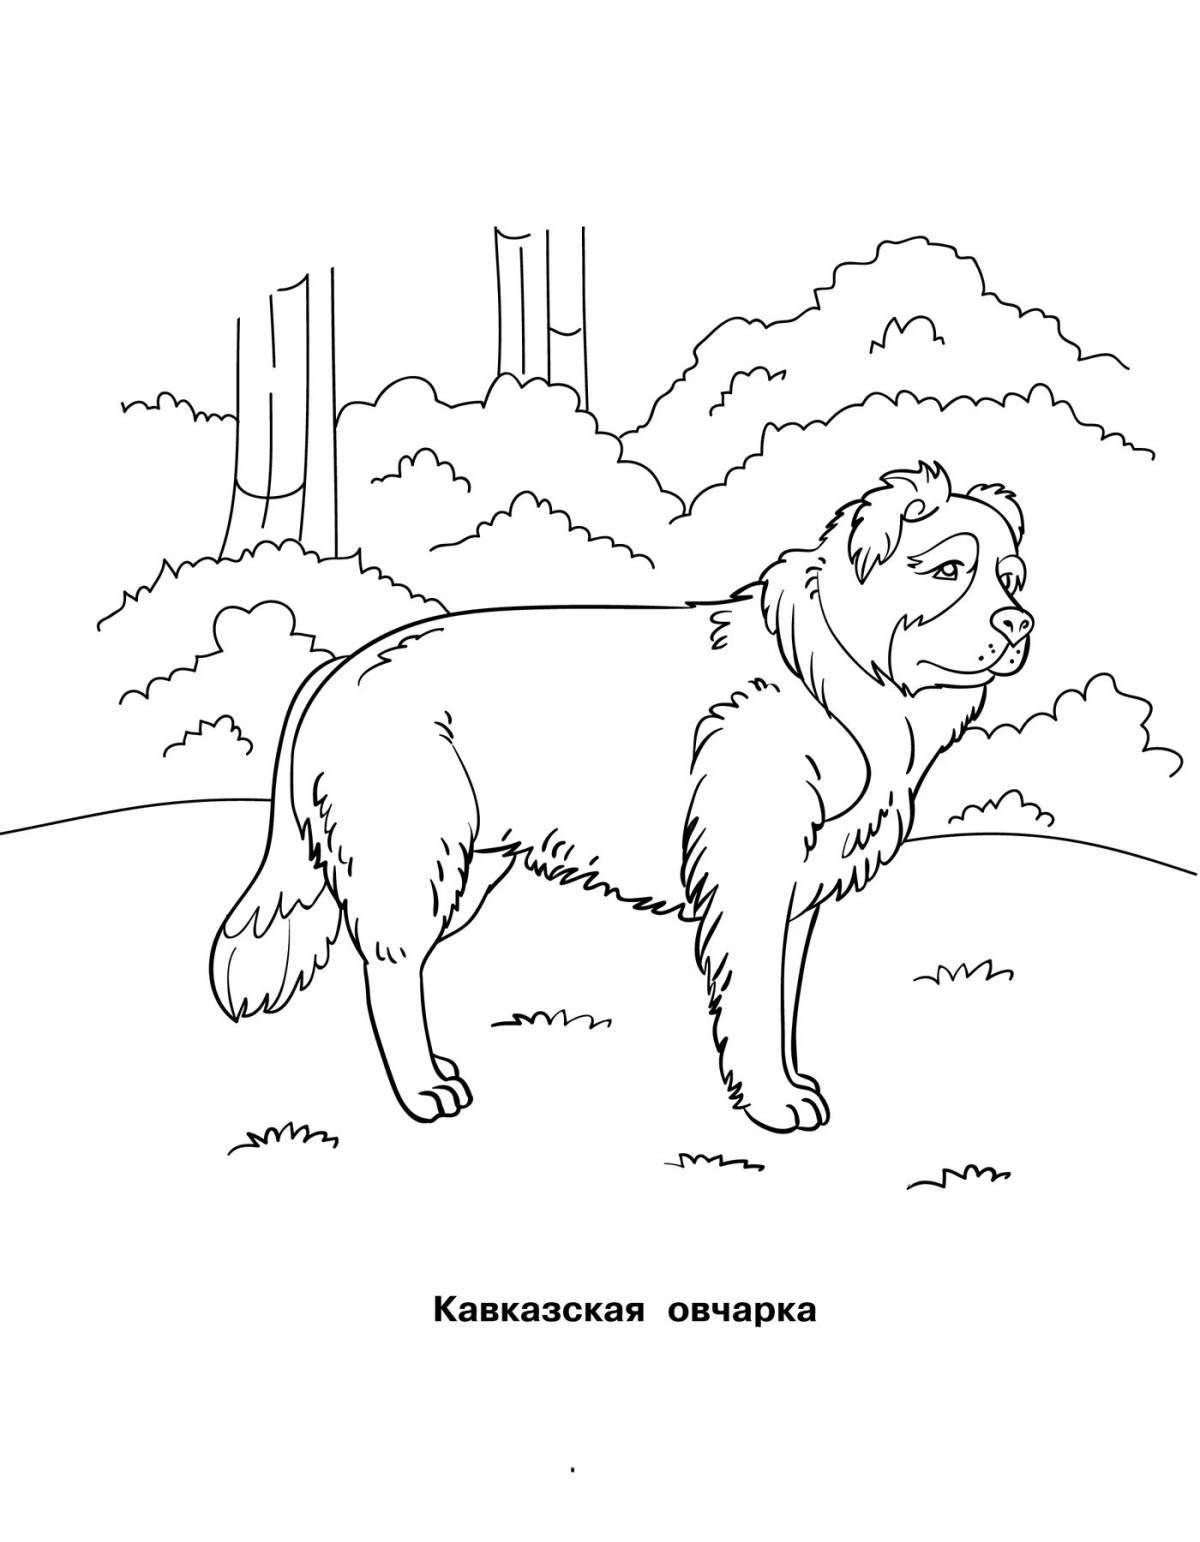 Colorful service dog coloring pages for kids